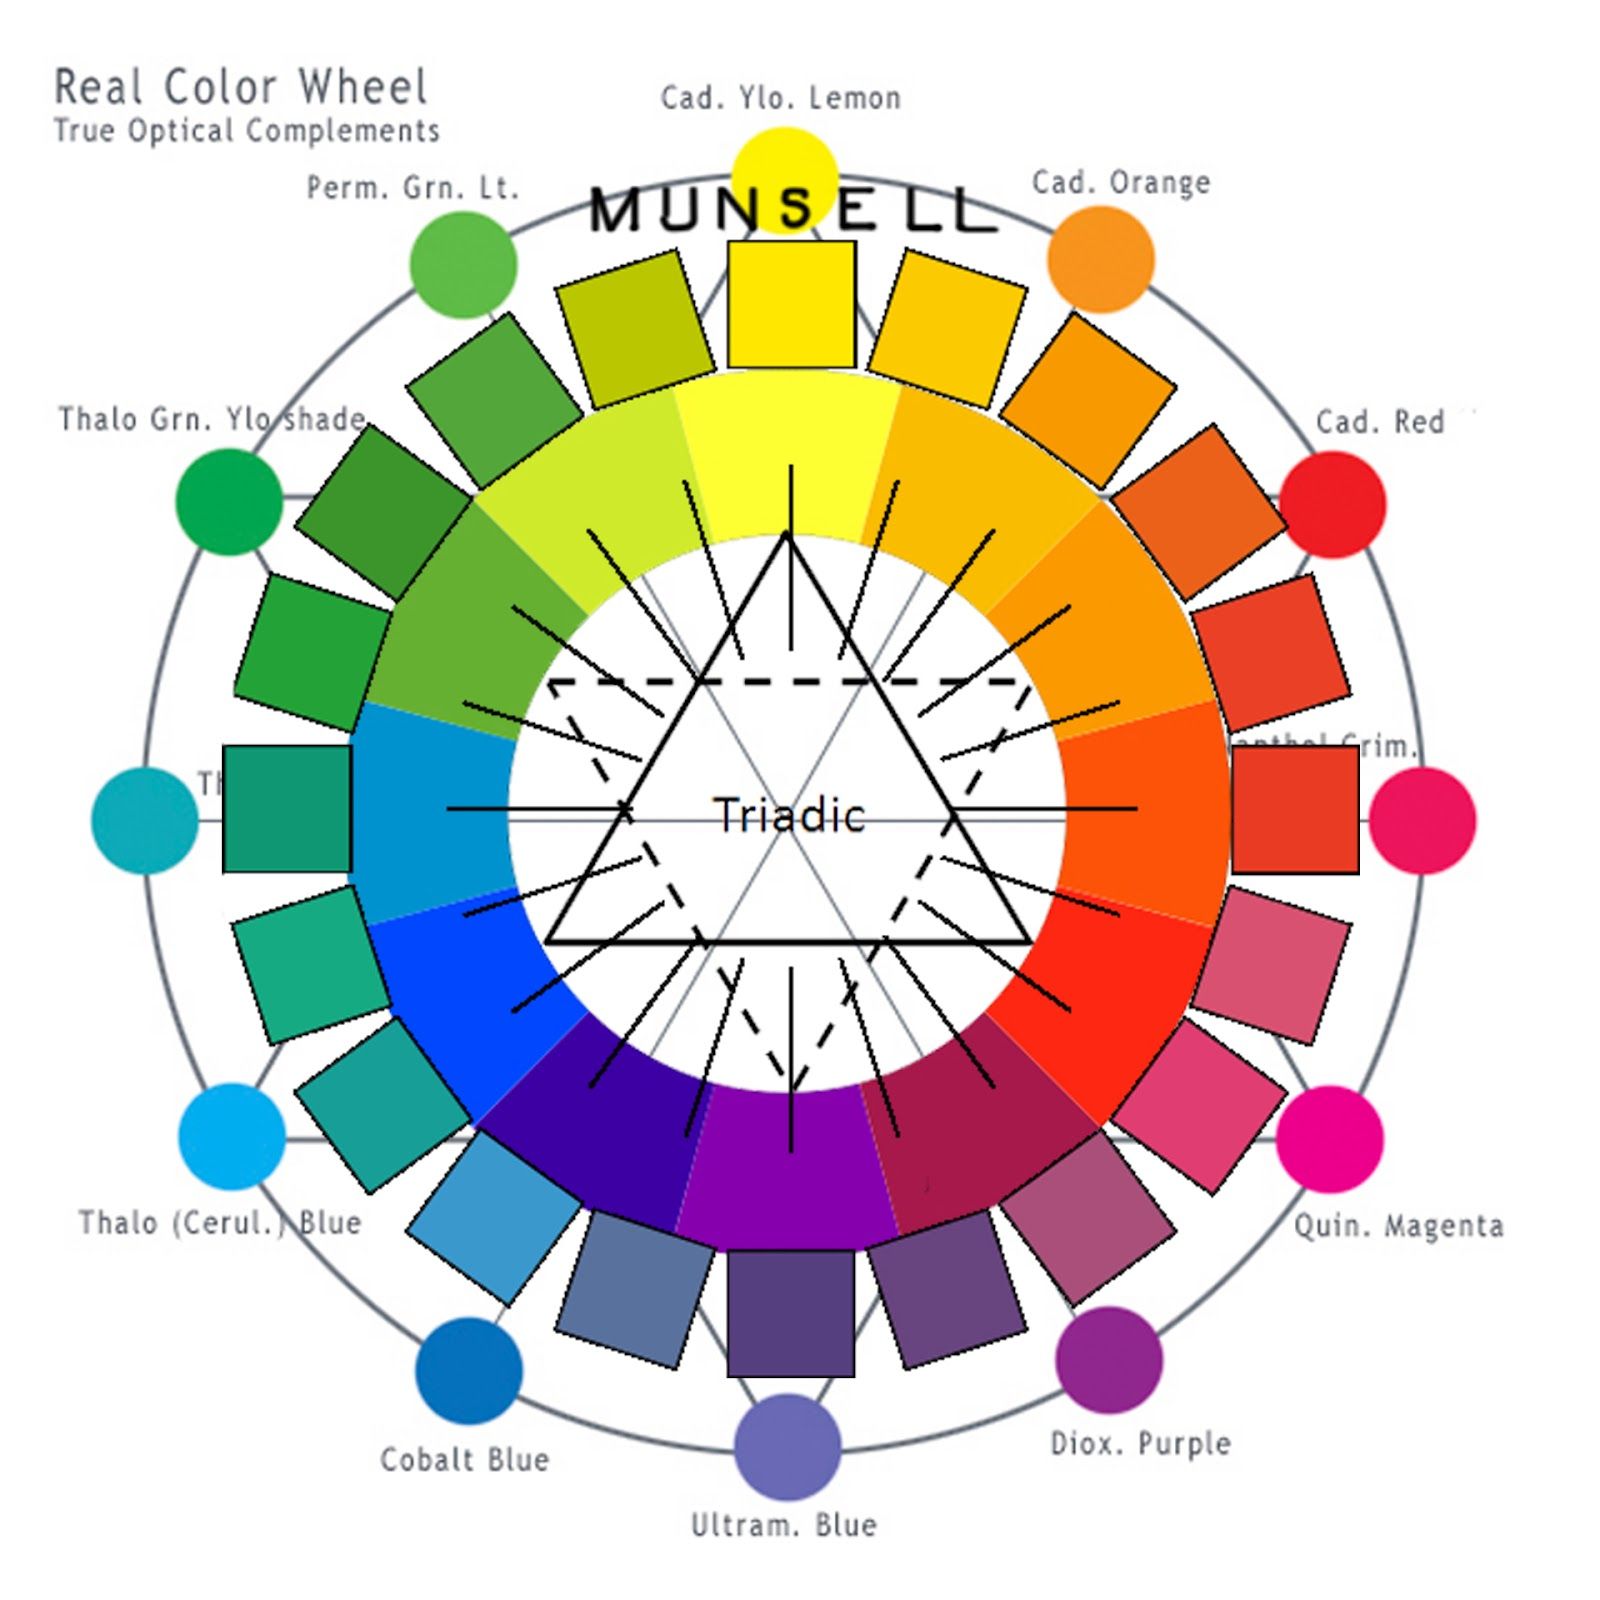 complementary 'color wheel' vs. mixing 'color wheel